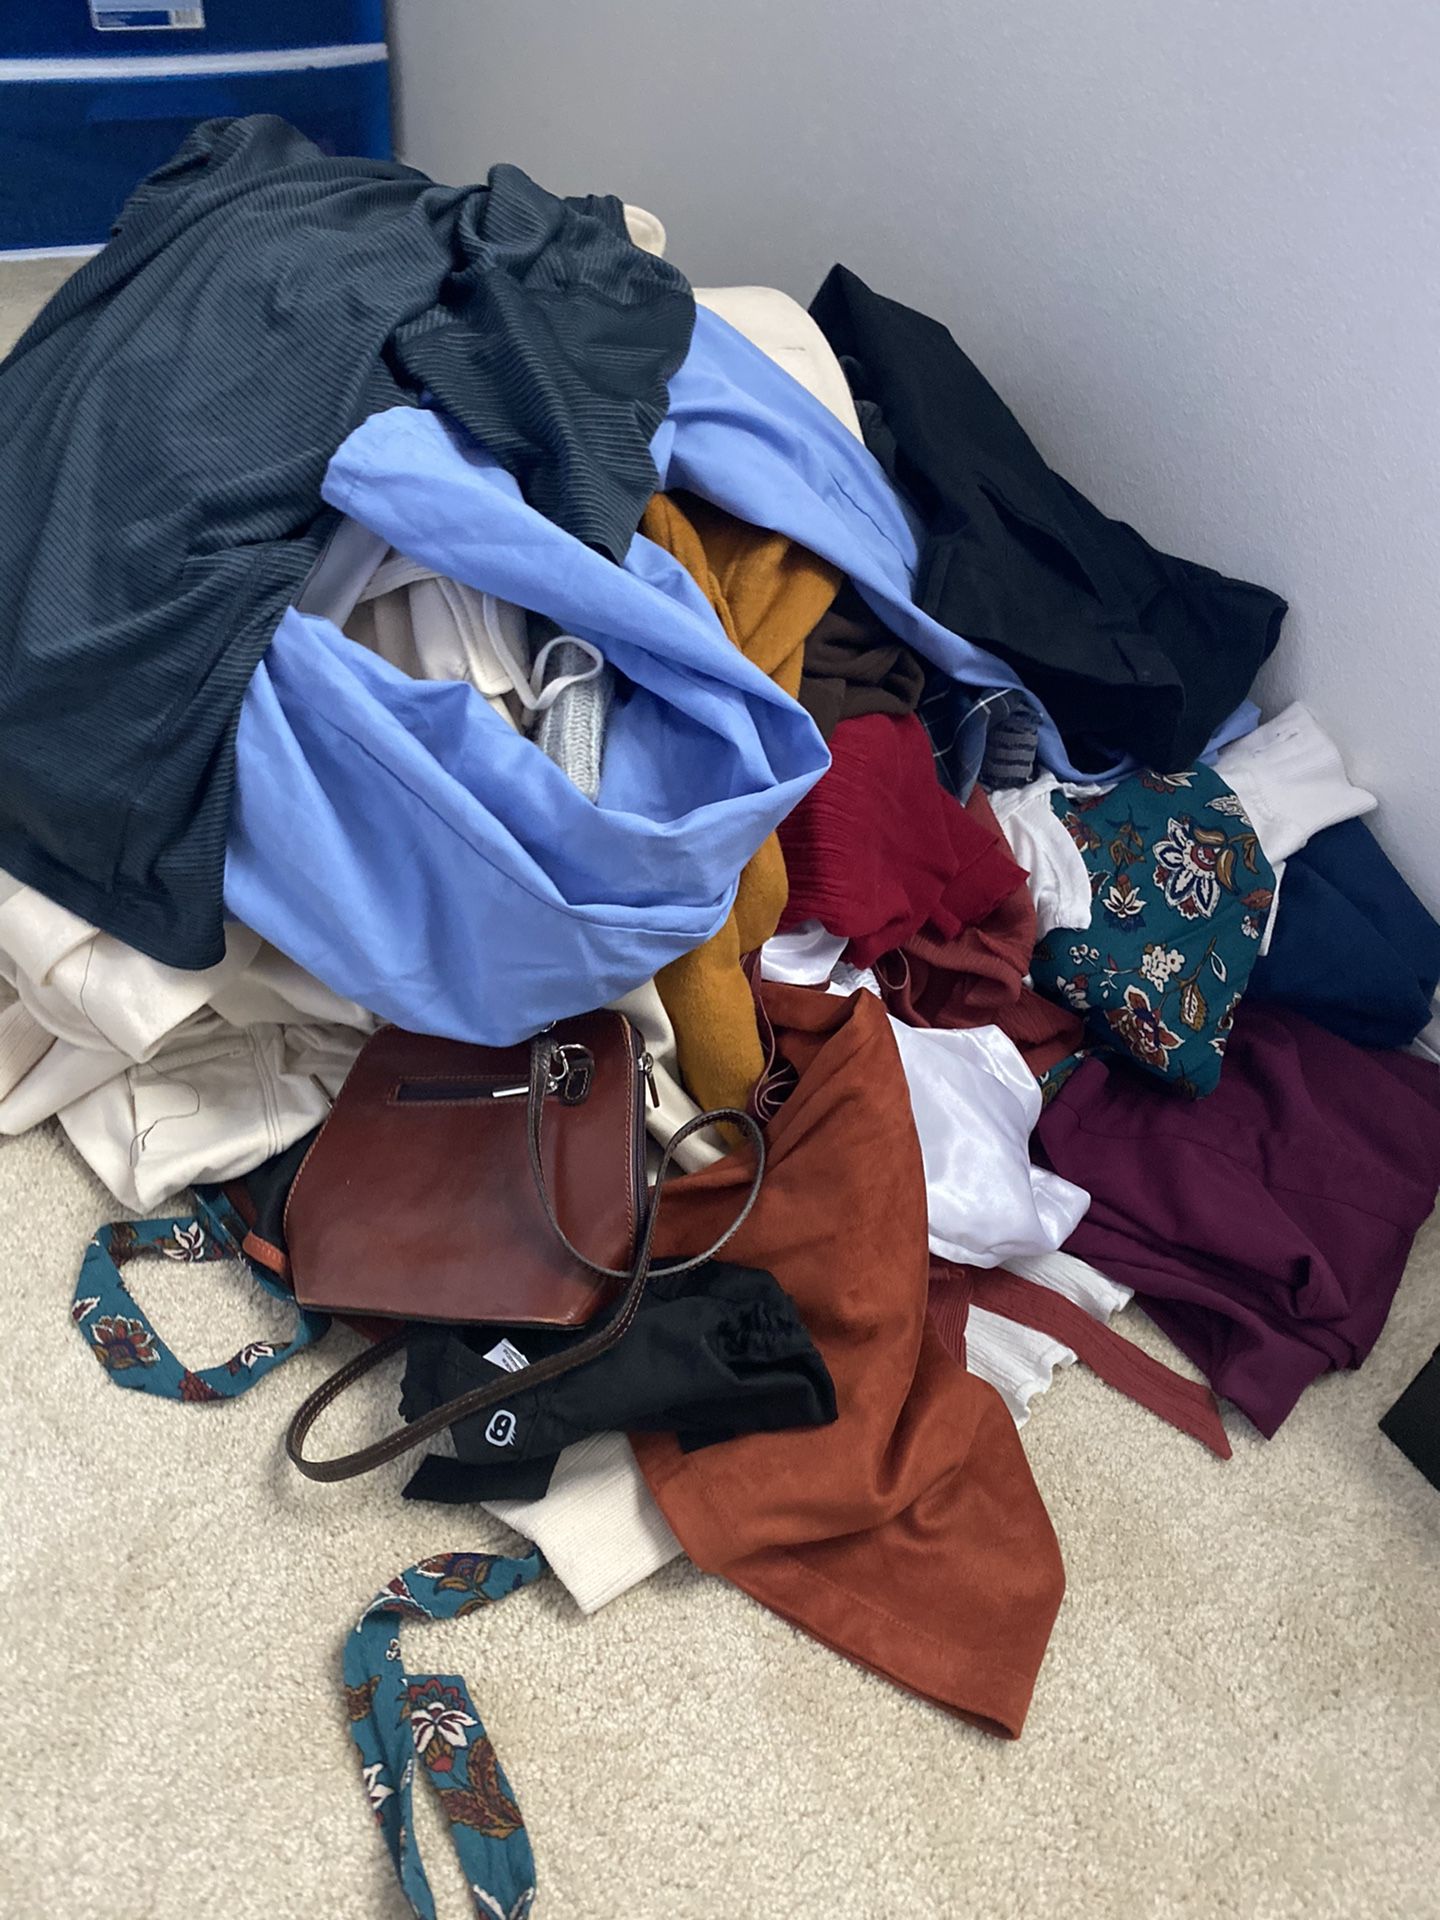 Free lot of junior/women’s/men’s clothing and accessories